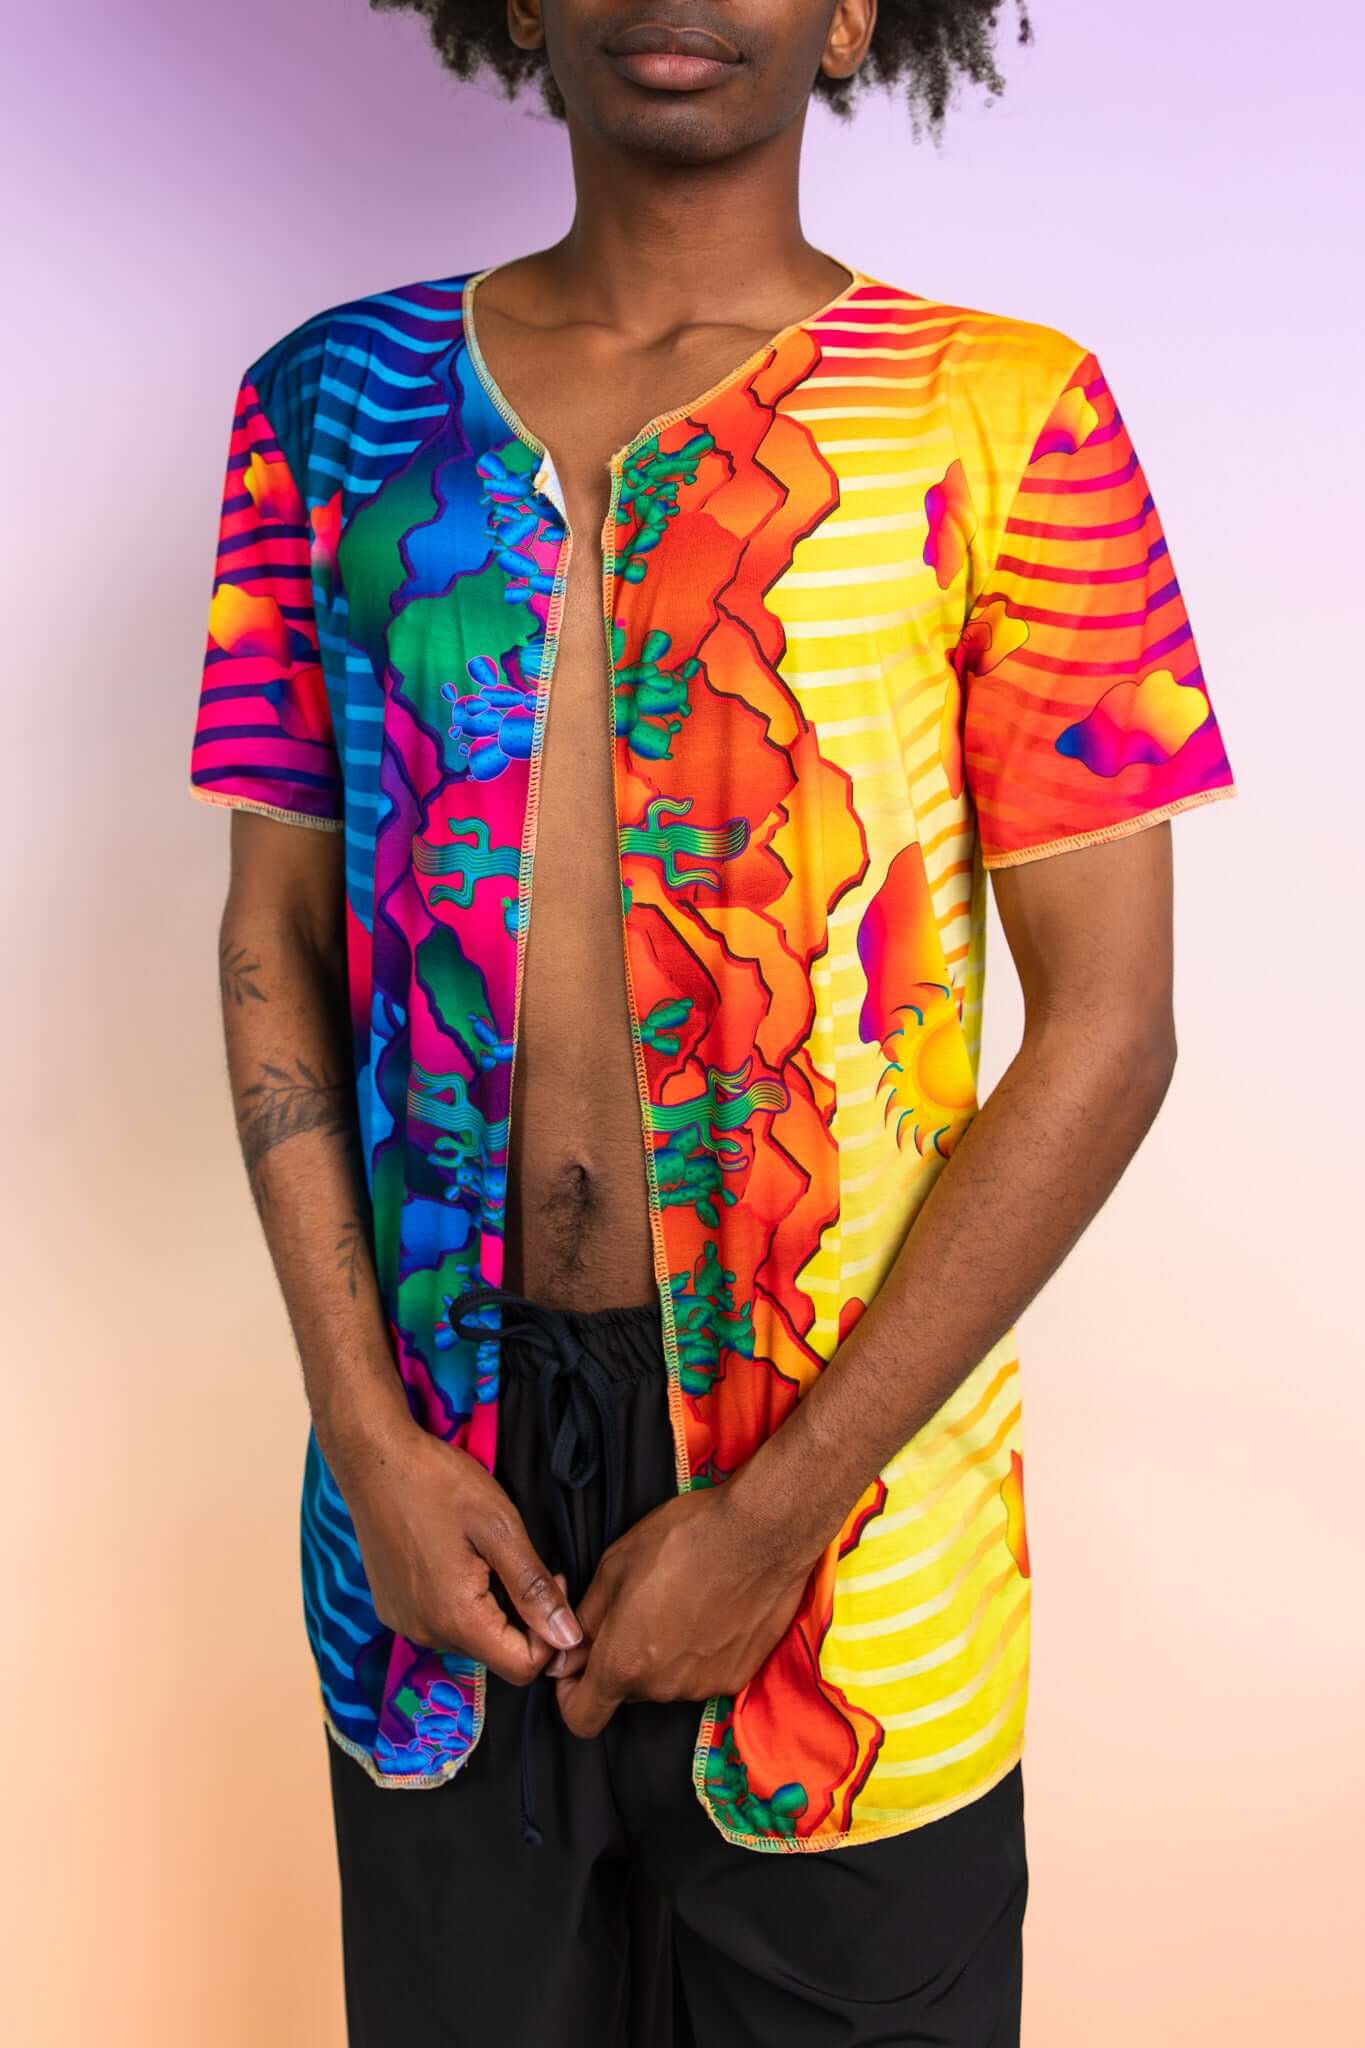 Colorful Freedom Rave Wear open-front tee in vibrant, flowing patterns ideal for a festival look, emphasizing a laid-back yet bold style